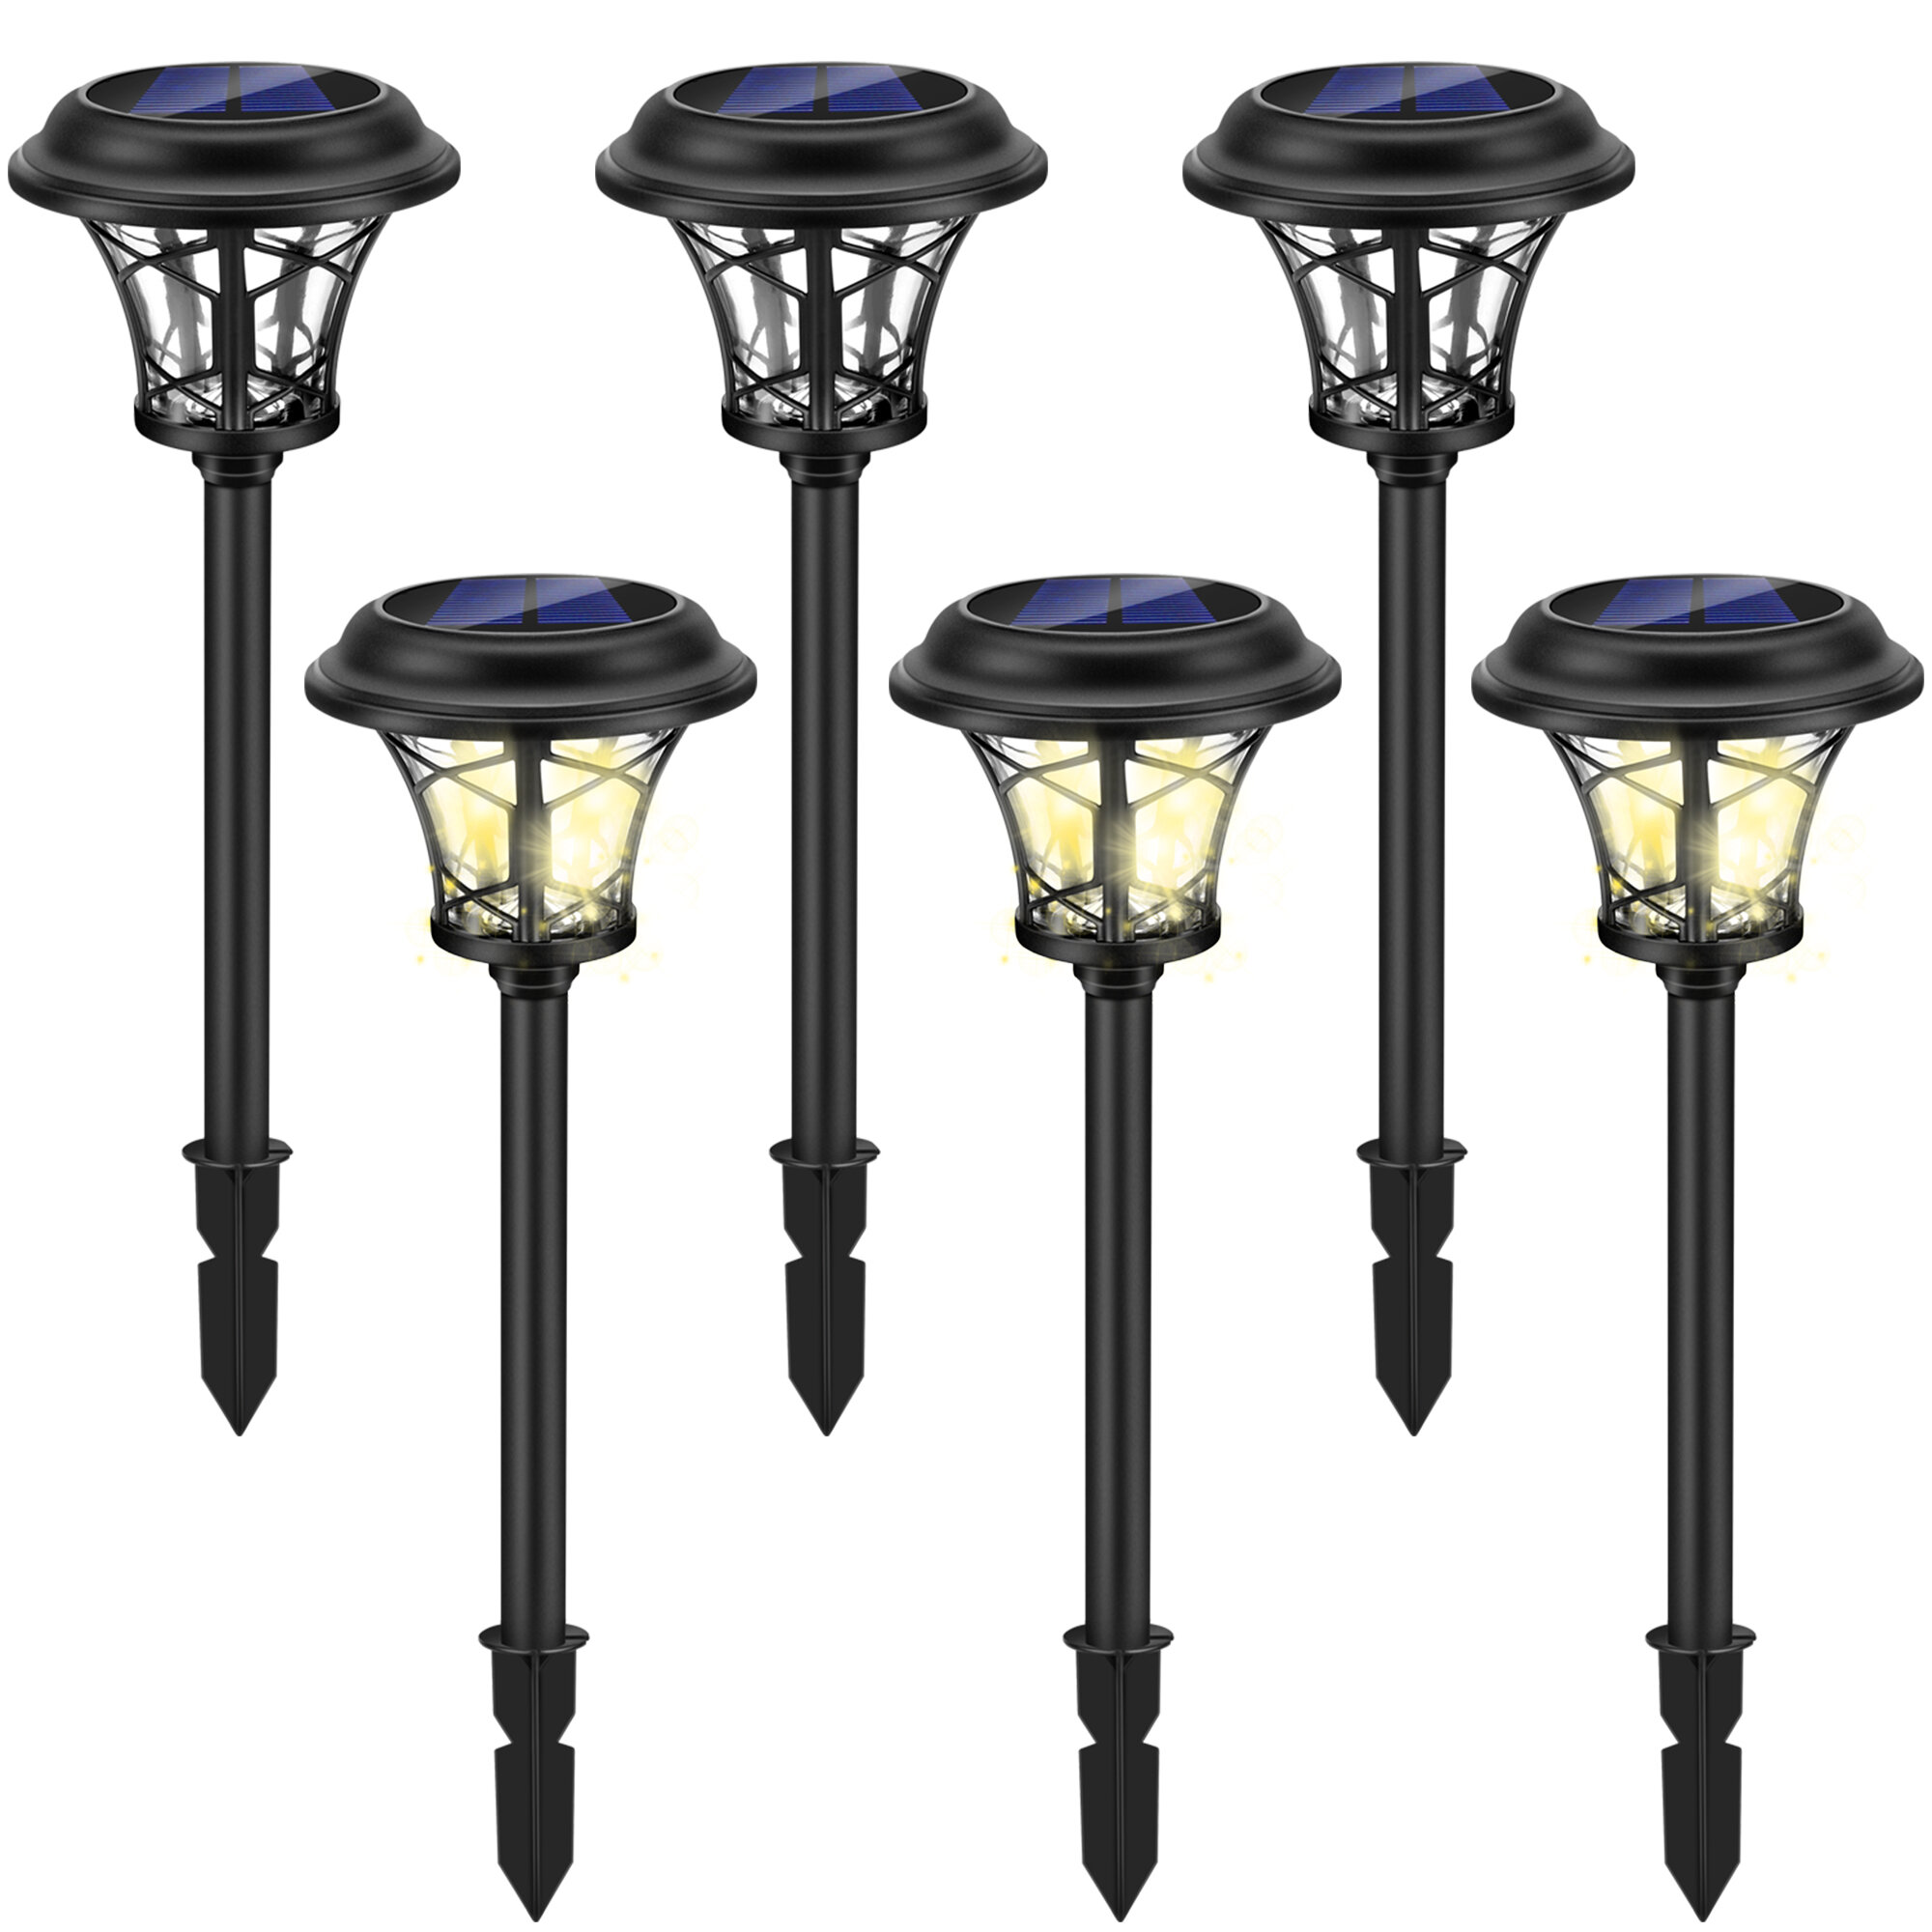 6 Pack Solar Pathway Lights Outdoor Landscape Lights for Lawn Patio Yard Garden 